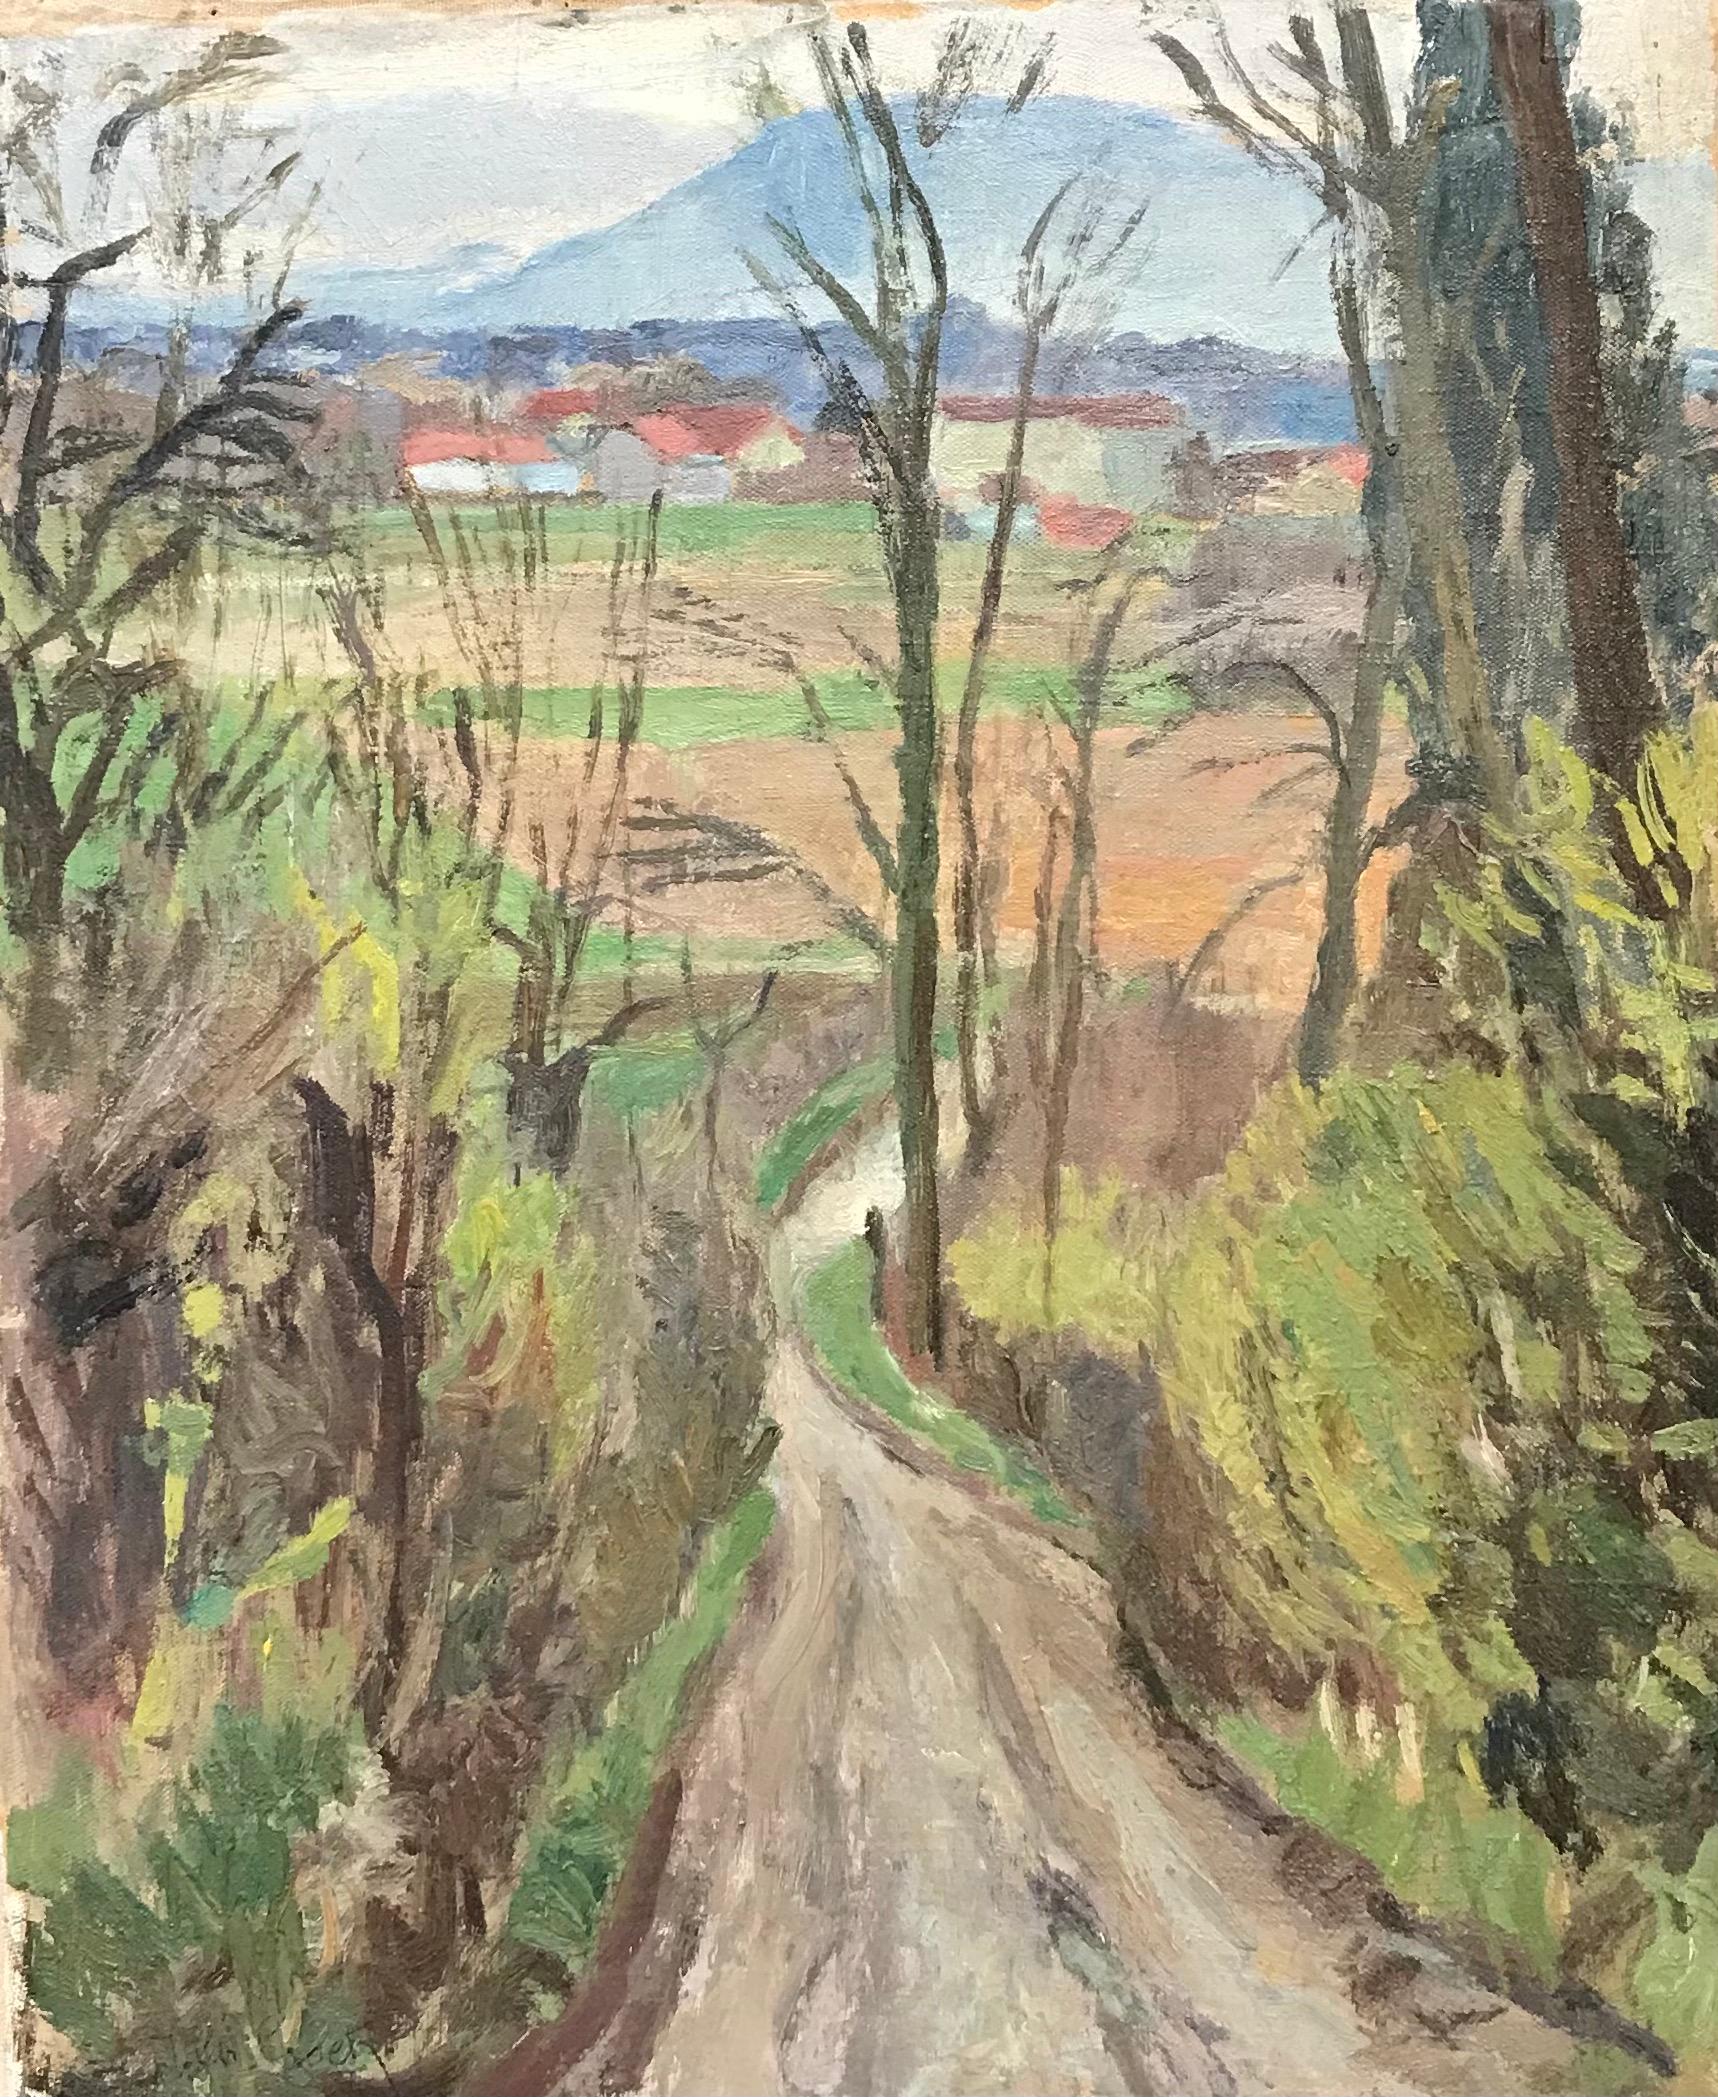 Isaac Charles Goetz Landscape Painting - The path by I. Ch. Goetz - Oil on canvas 38x46 cm